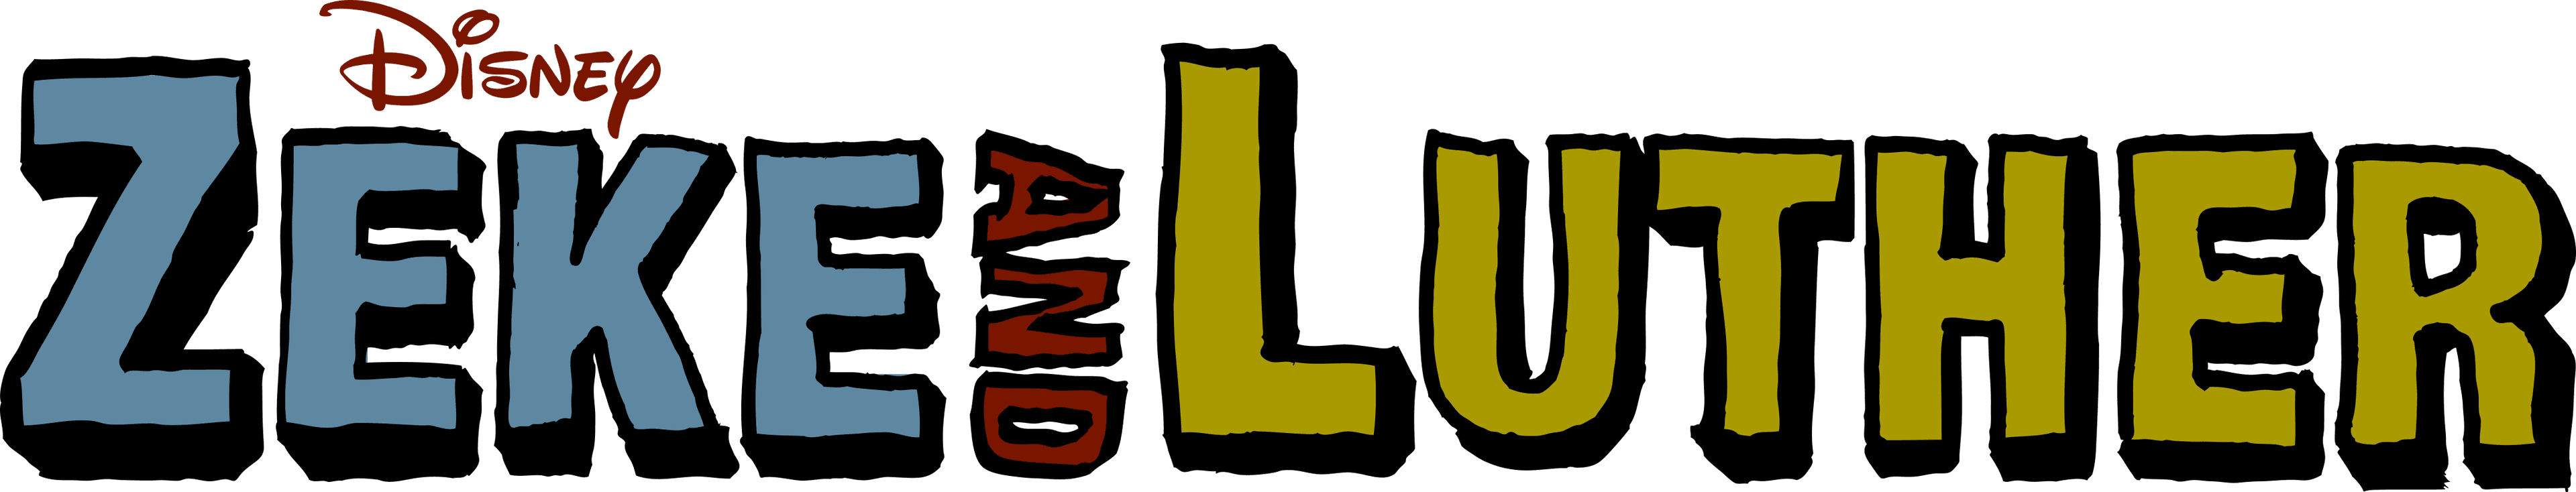 Zeke and Luther logo